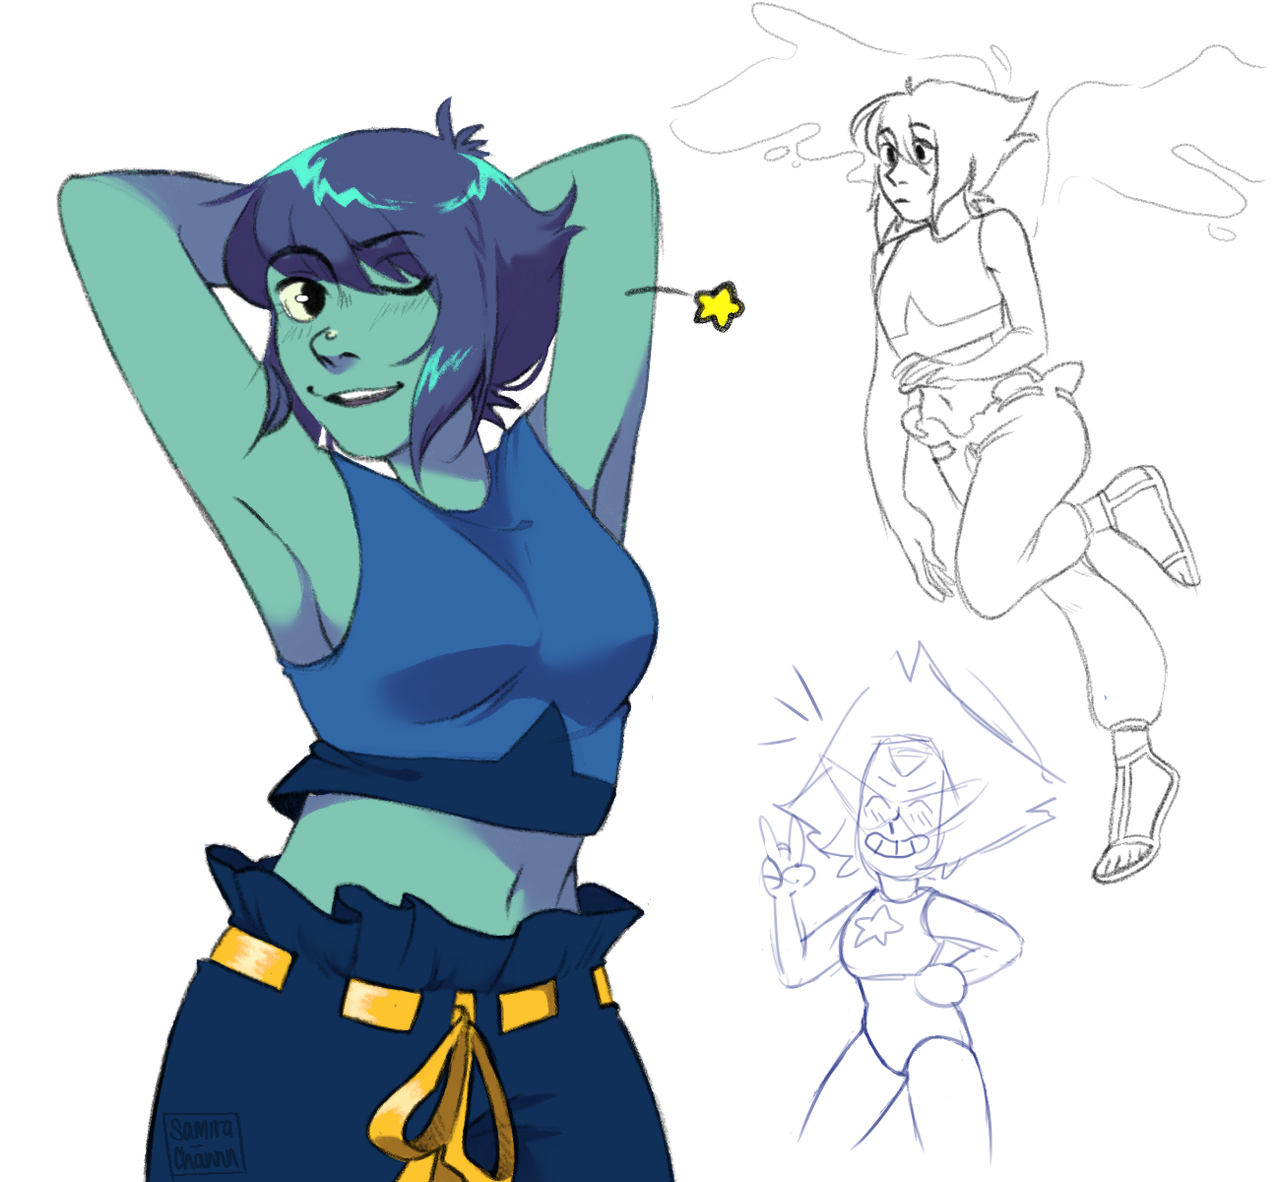 will never get over re-newed Lapis (ft. a lil peri)